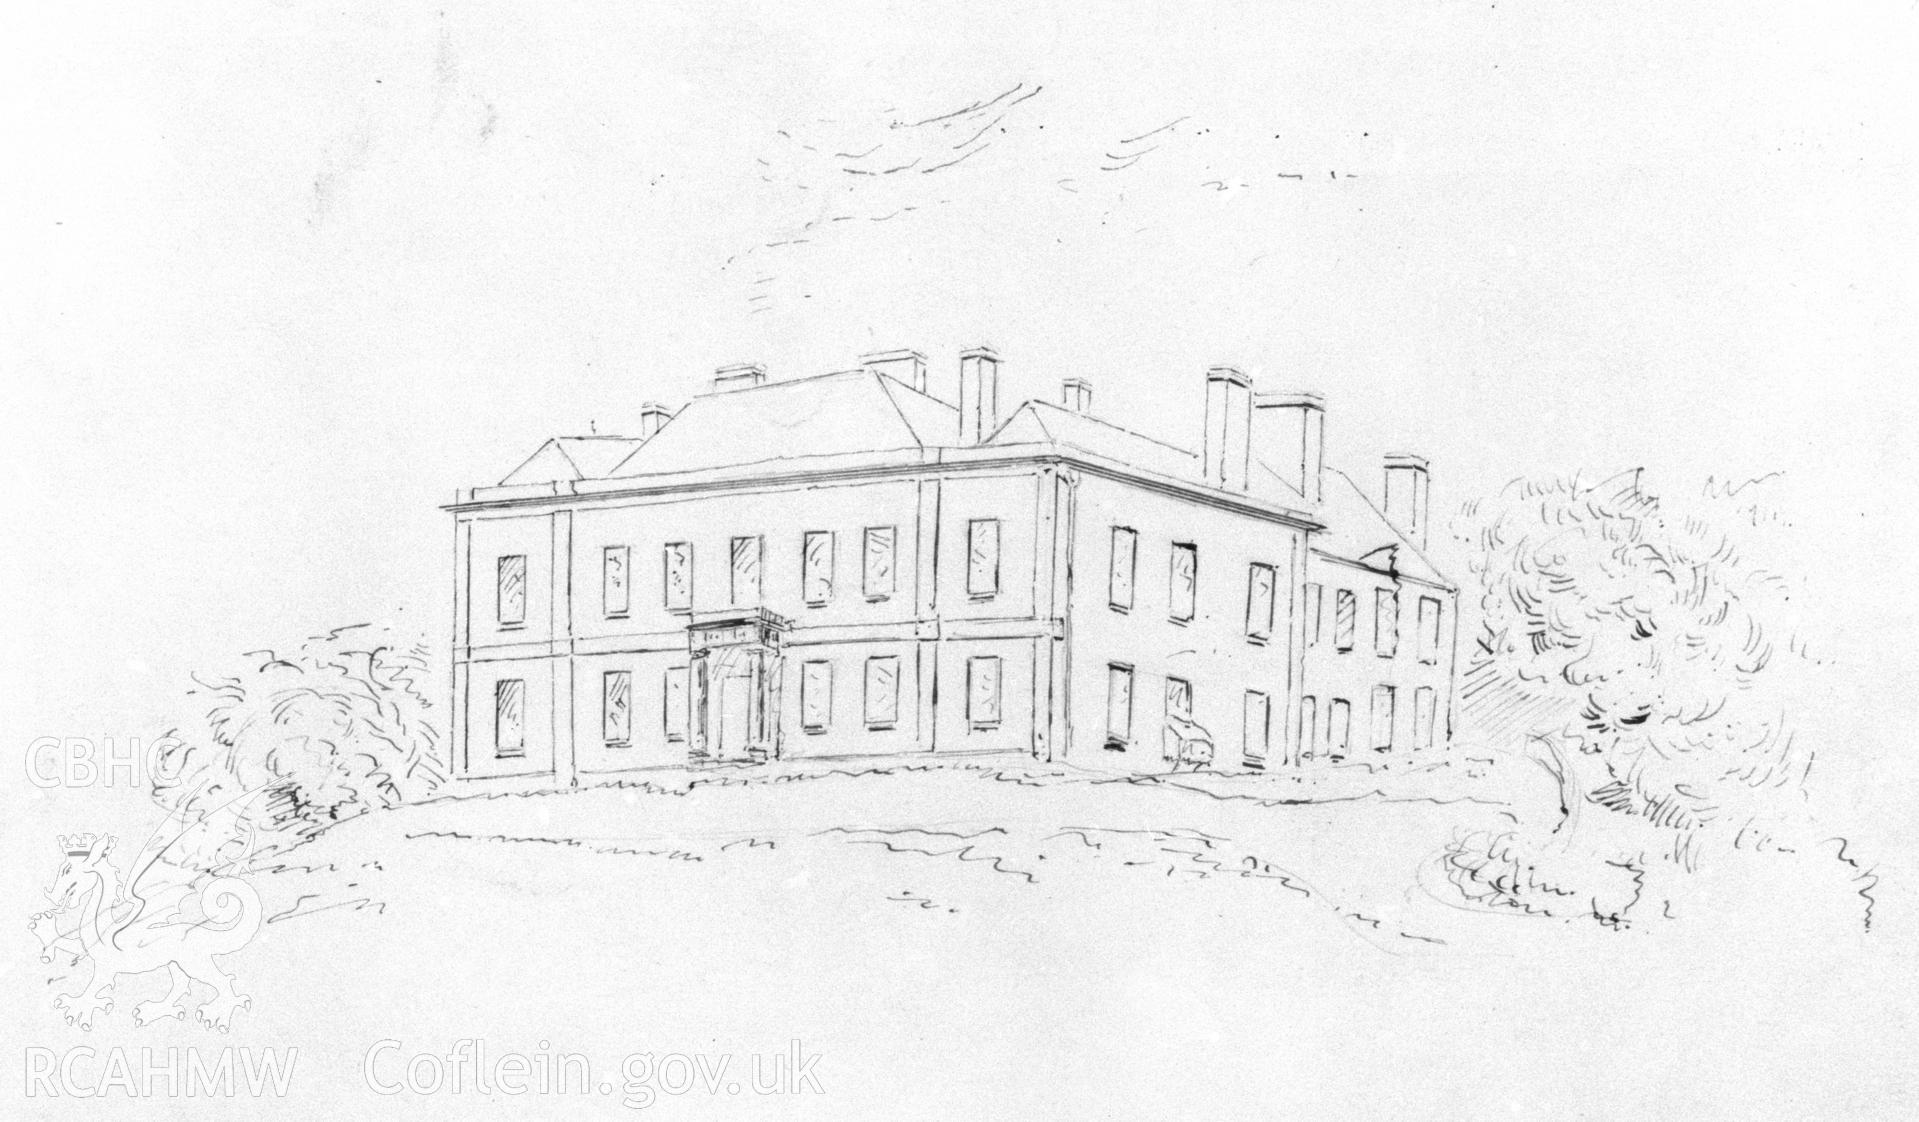 Digital copy of a photo of a sketch of Dowlais House, originally loaned for copying by Thomas Lloyd.